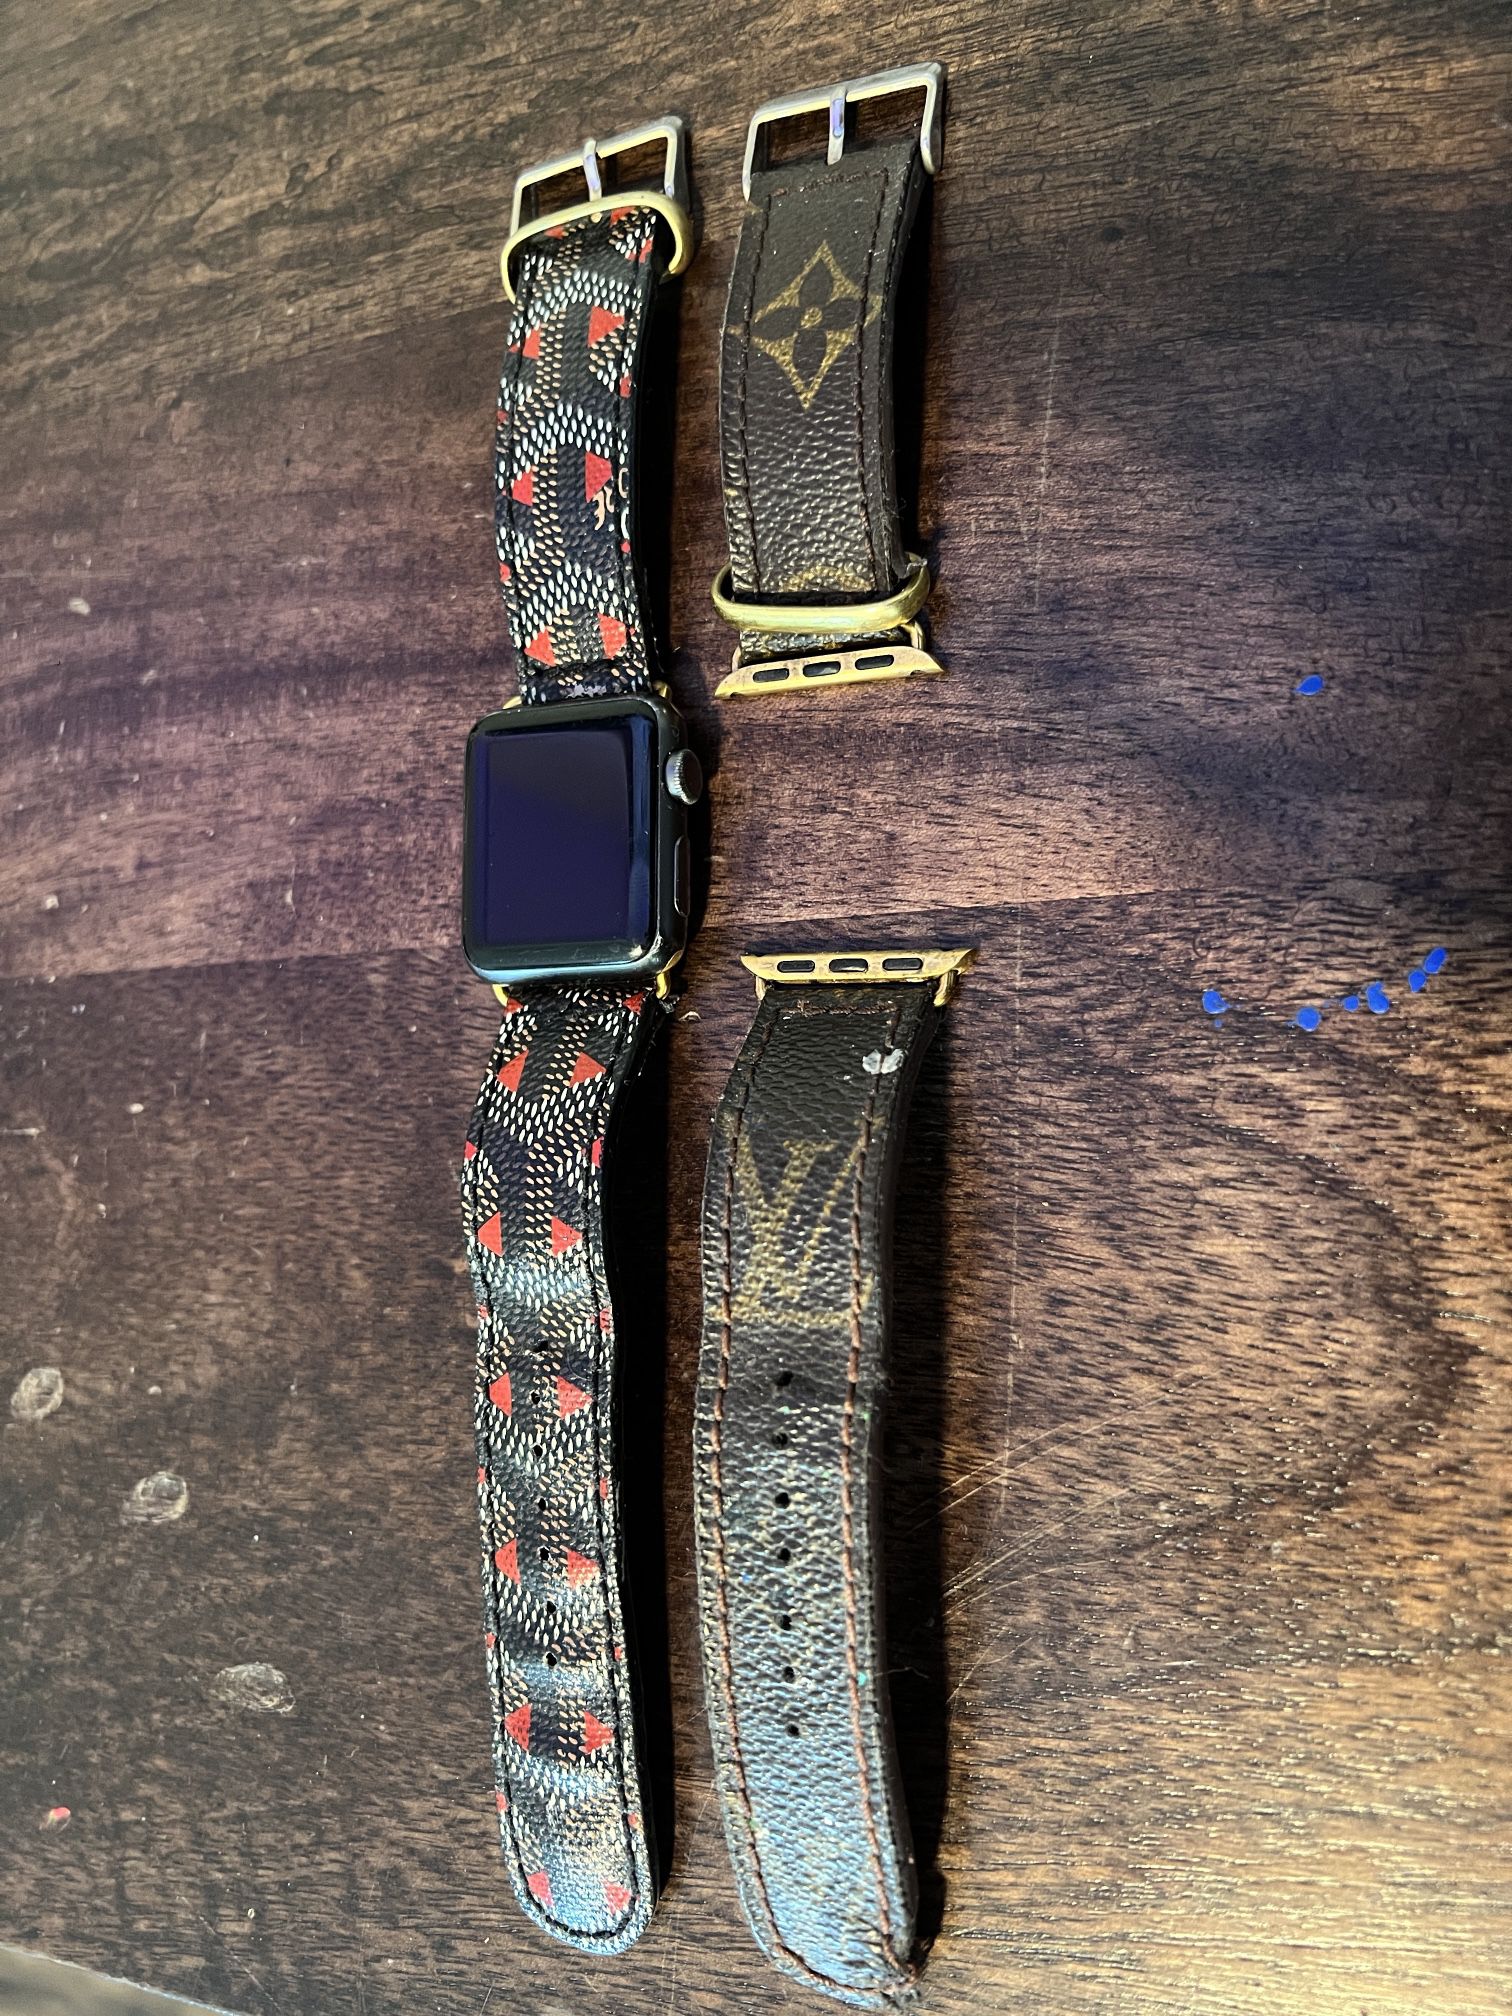 Louis Vuitton Apple Watch Band, Authentic Repurposed